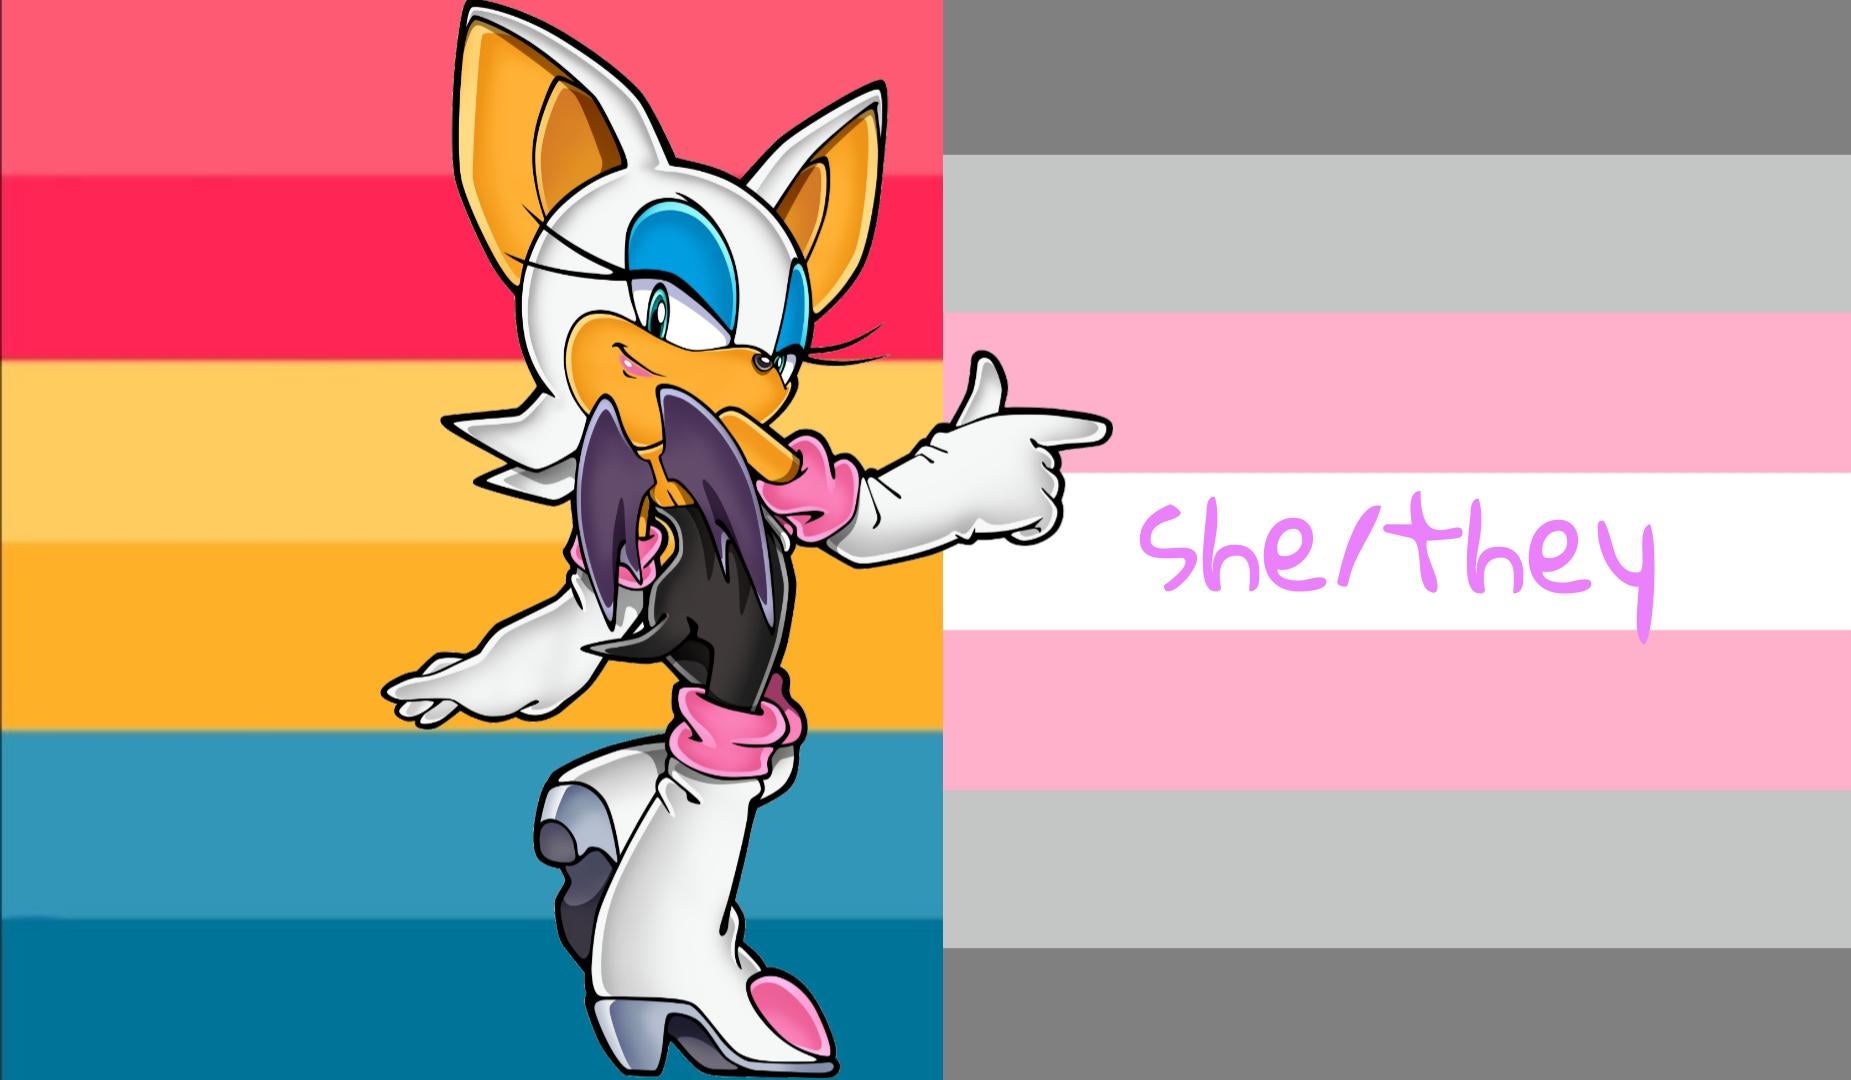 Rouge is a Pansexual demigirl ♡